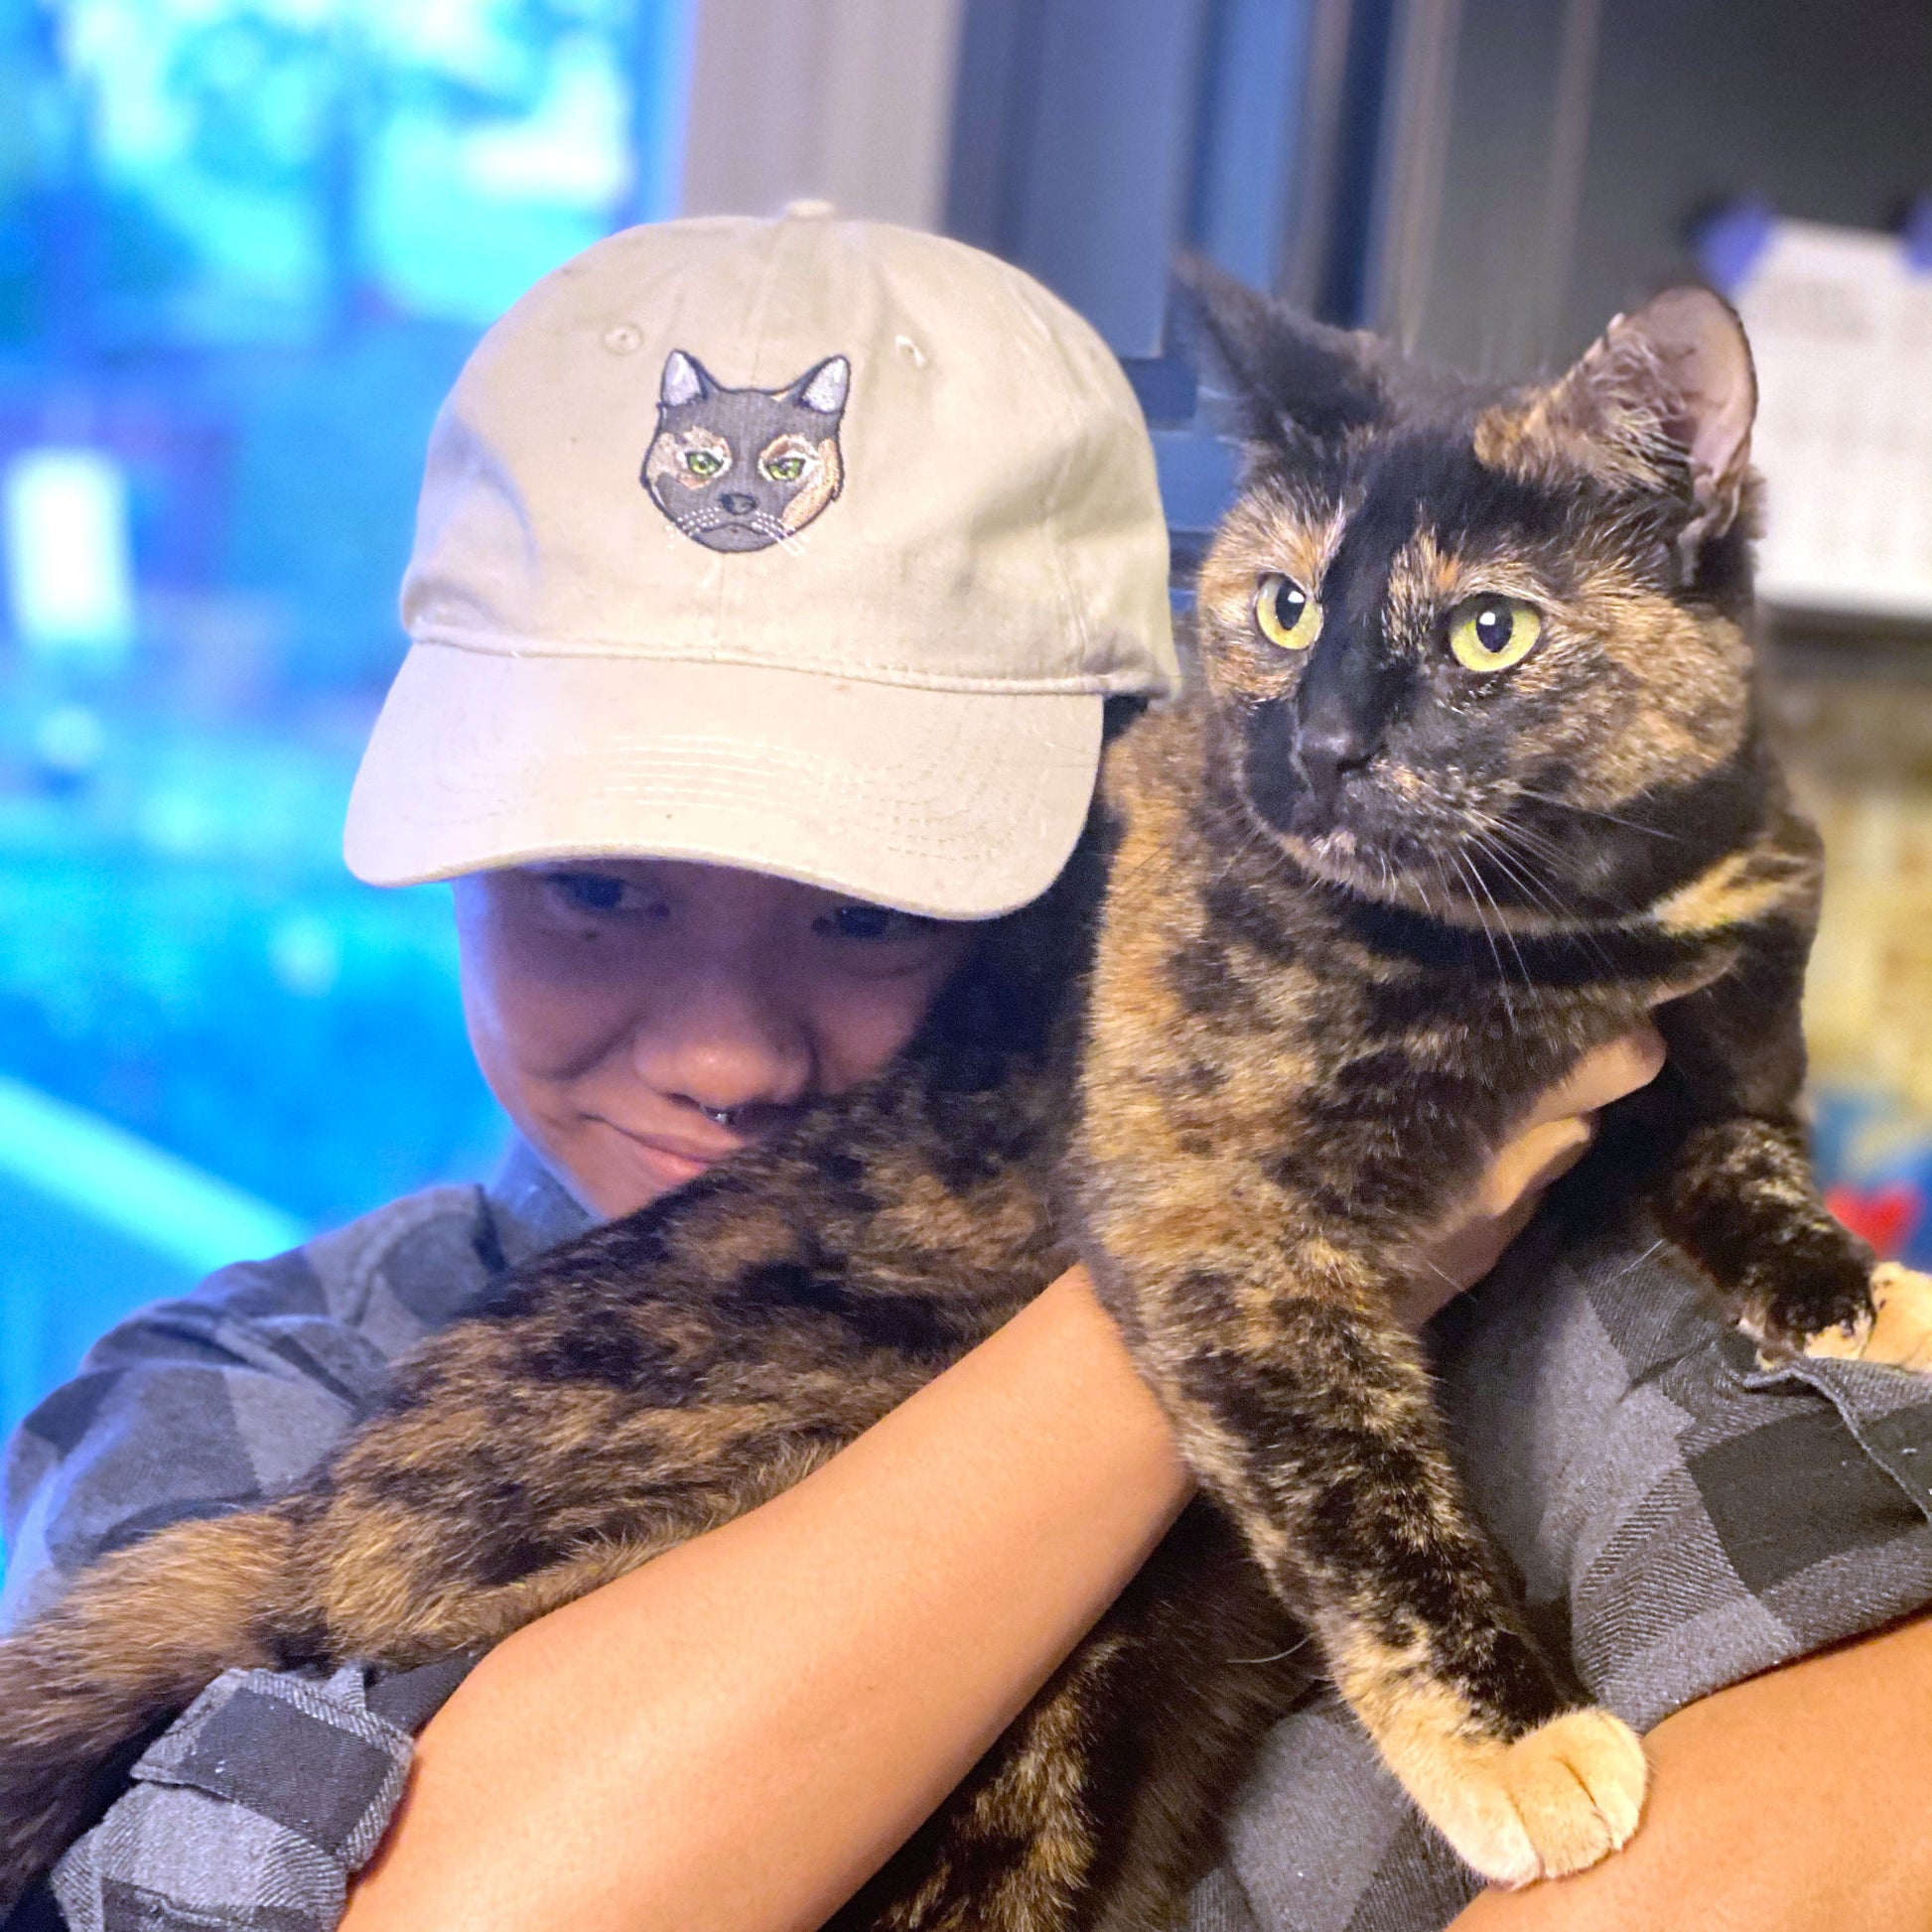 Khaki dog dad hat with a cat embroidered on it on a cat mom holding her cat.